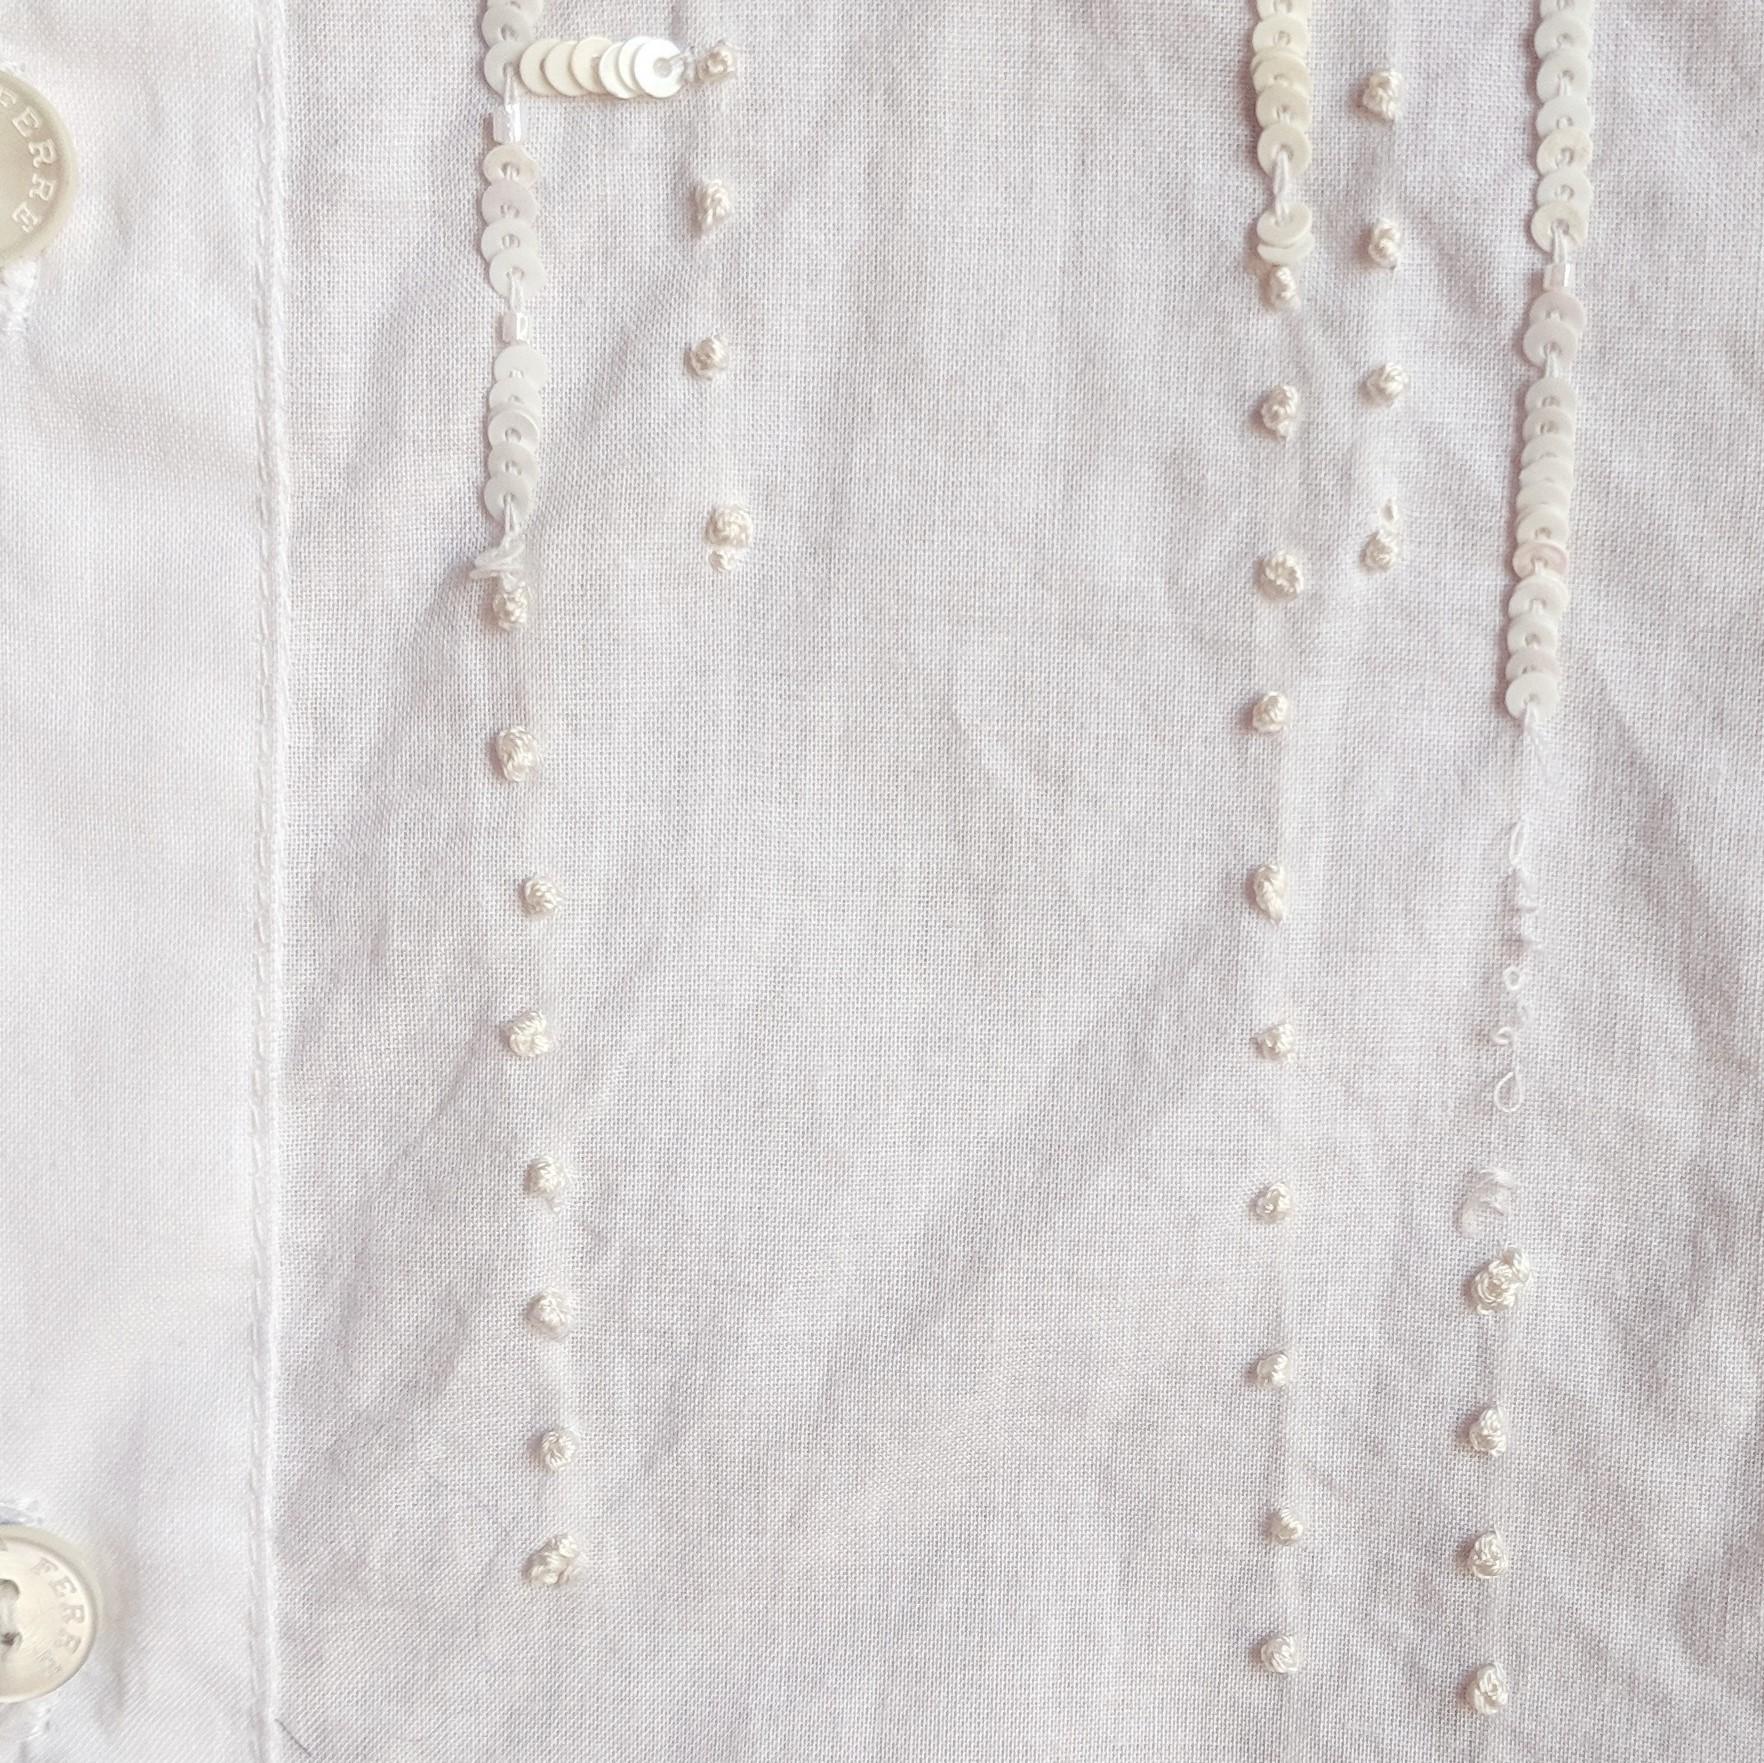 1990s Gianfranco Ferré Embroidered White Shirt 1